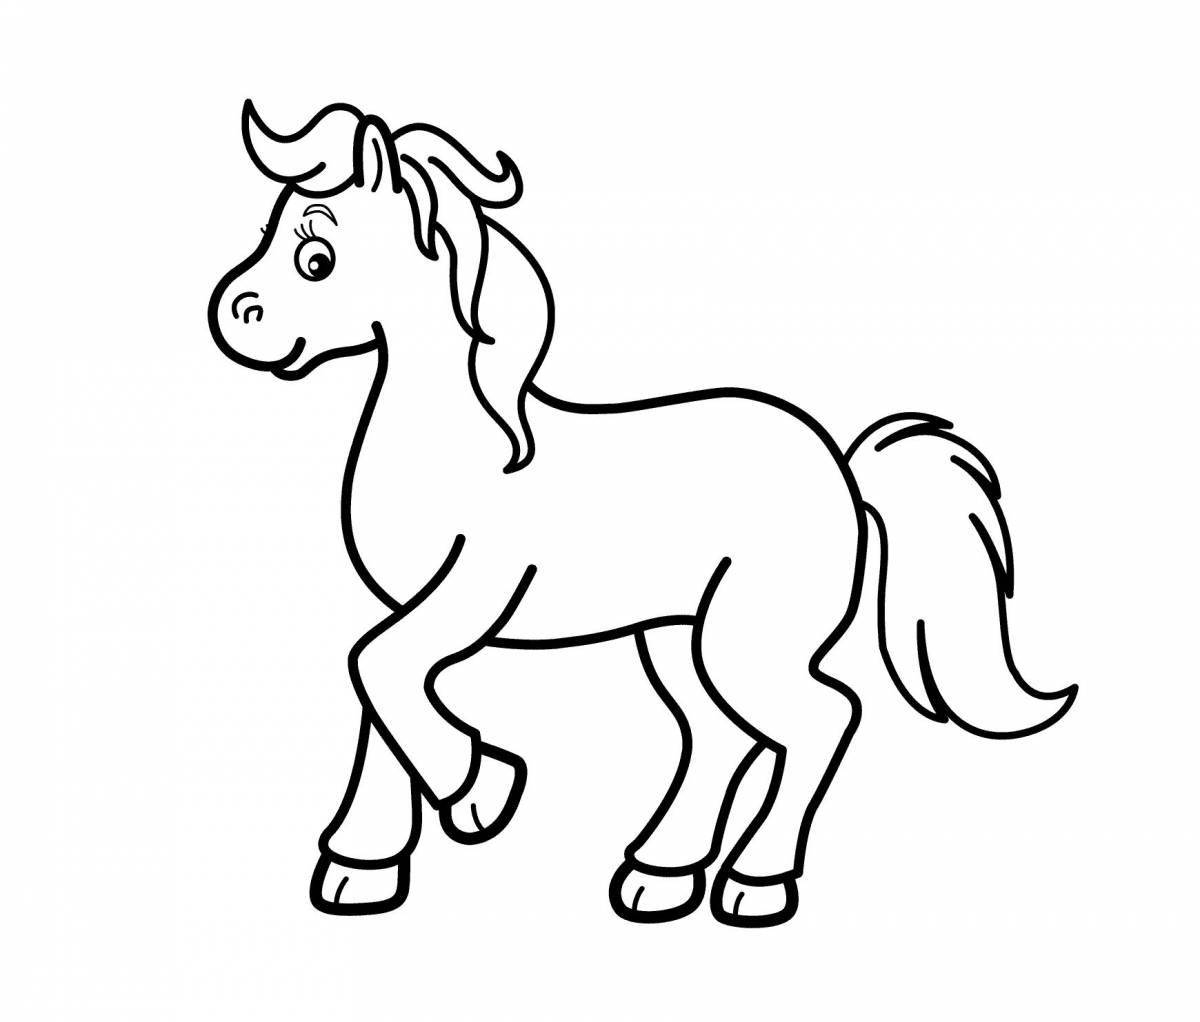 Coloring page graceful cartoon horse